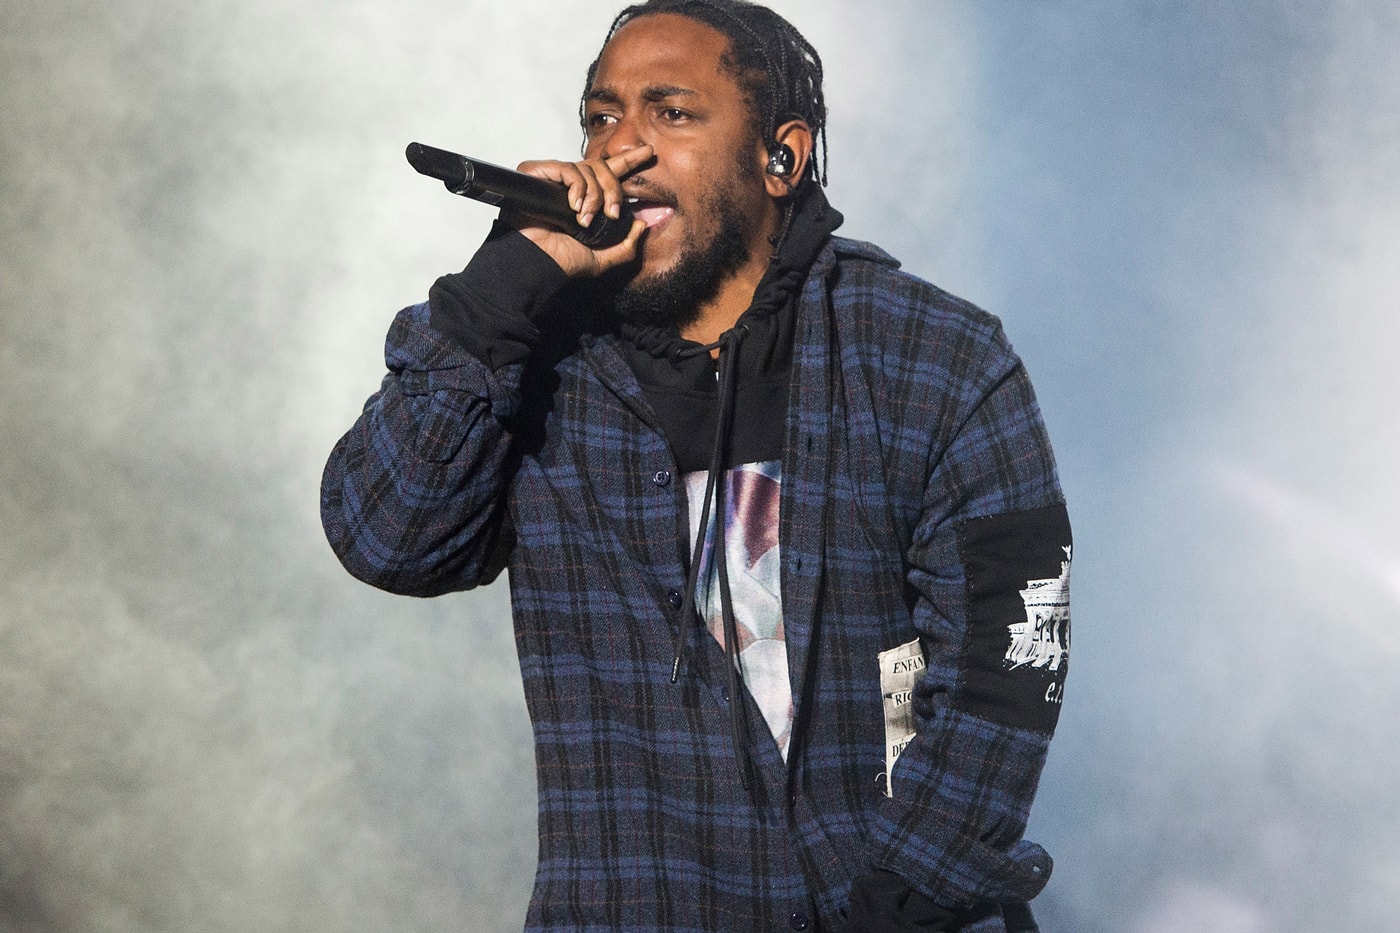 Kendrick Lamar Performs at Global Citizen Festival in Central Park video new york city Coldplay new york city Global Citizen Festival